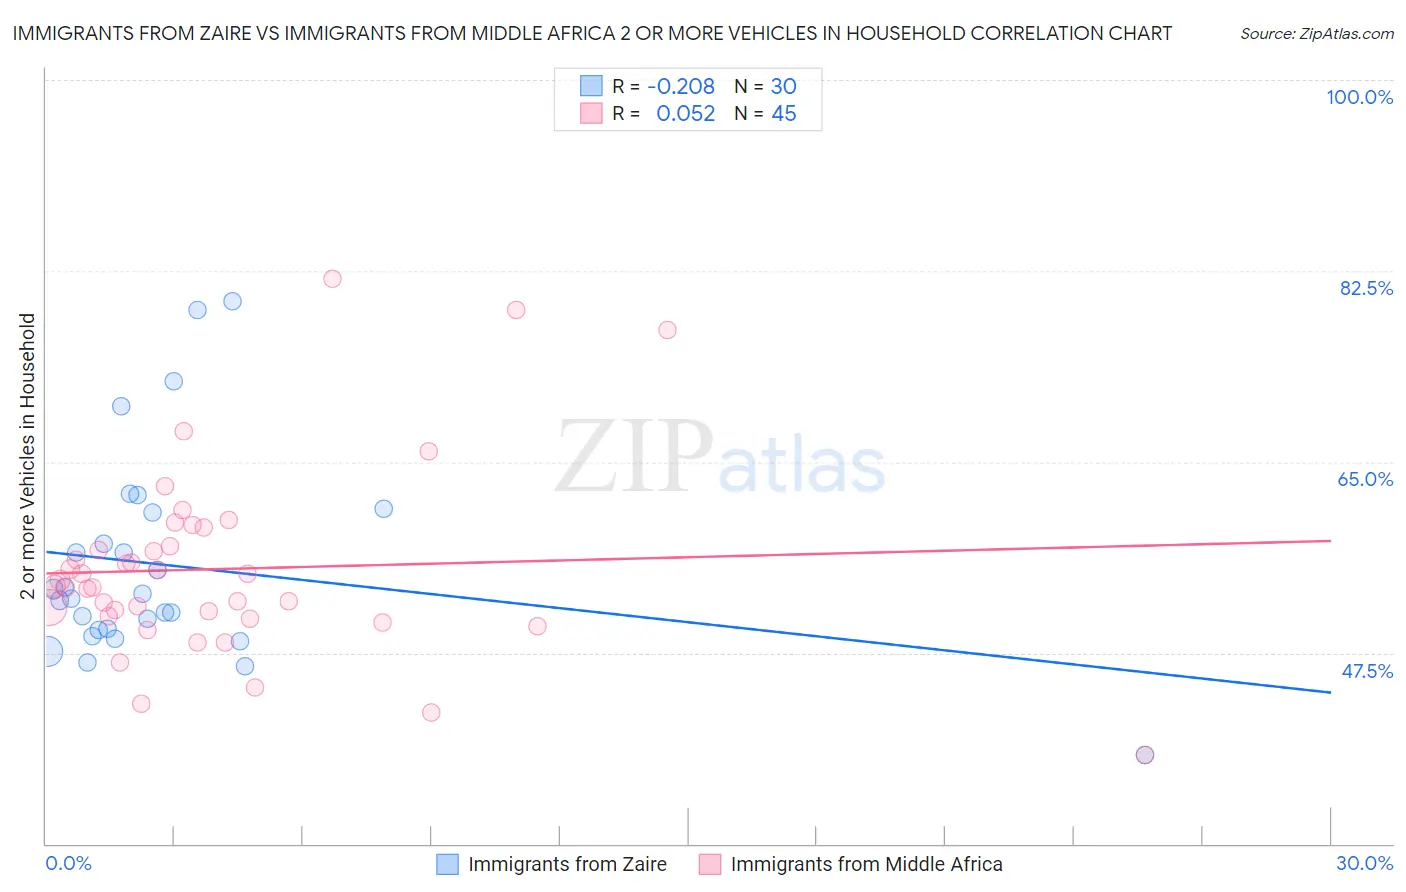 Immigrants from Zaire vs Immigrants from Middle Africa 2 or more Vehicles in Household